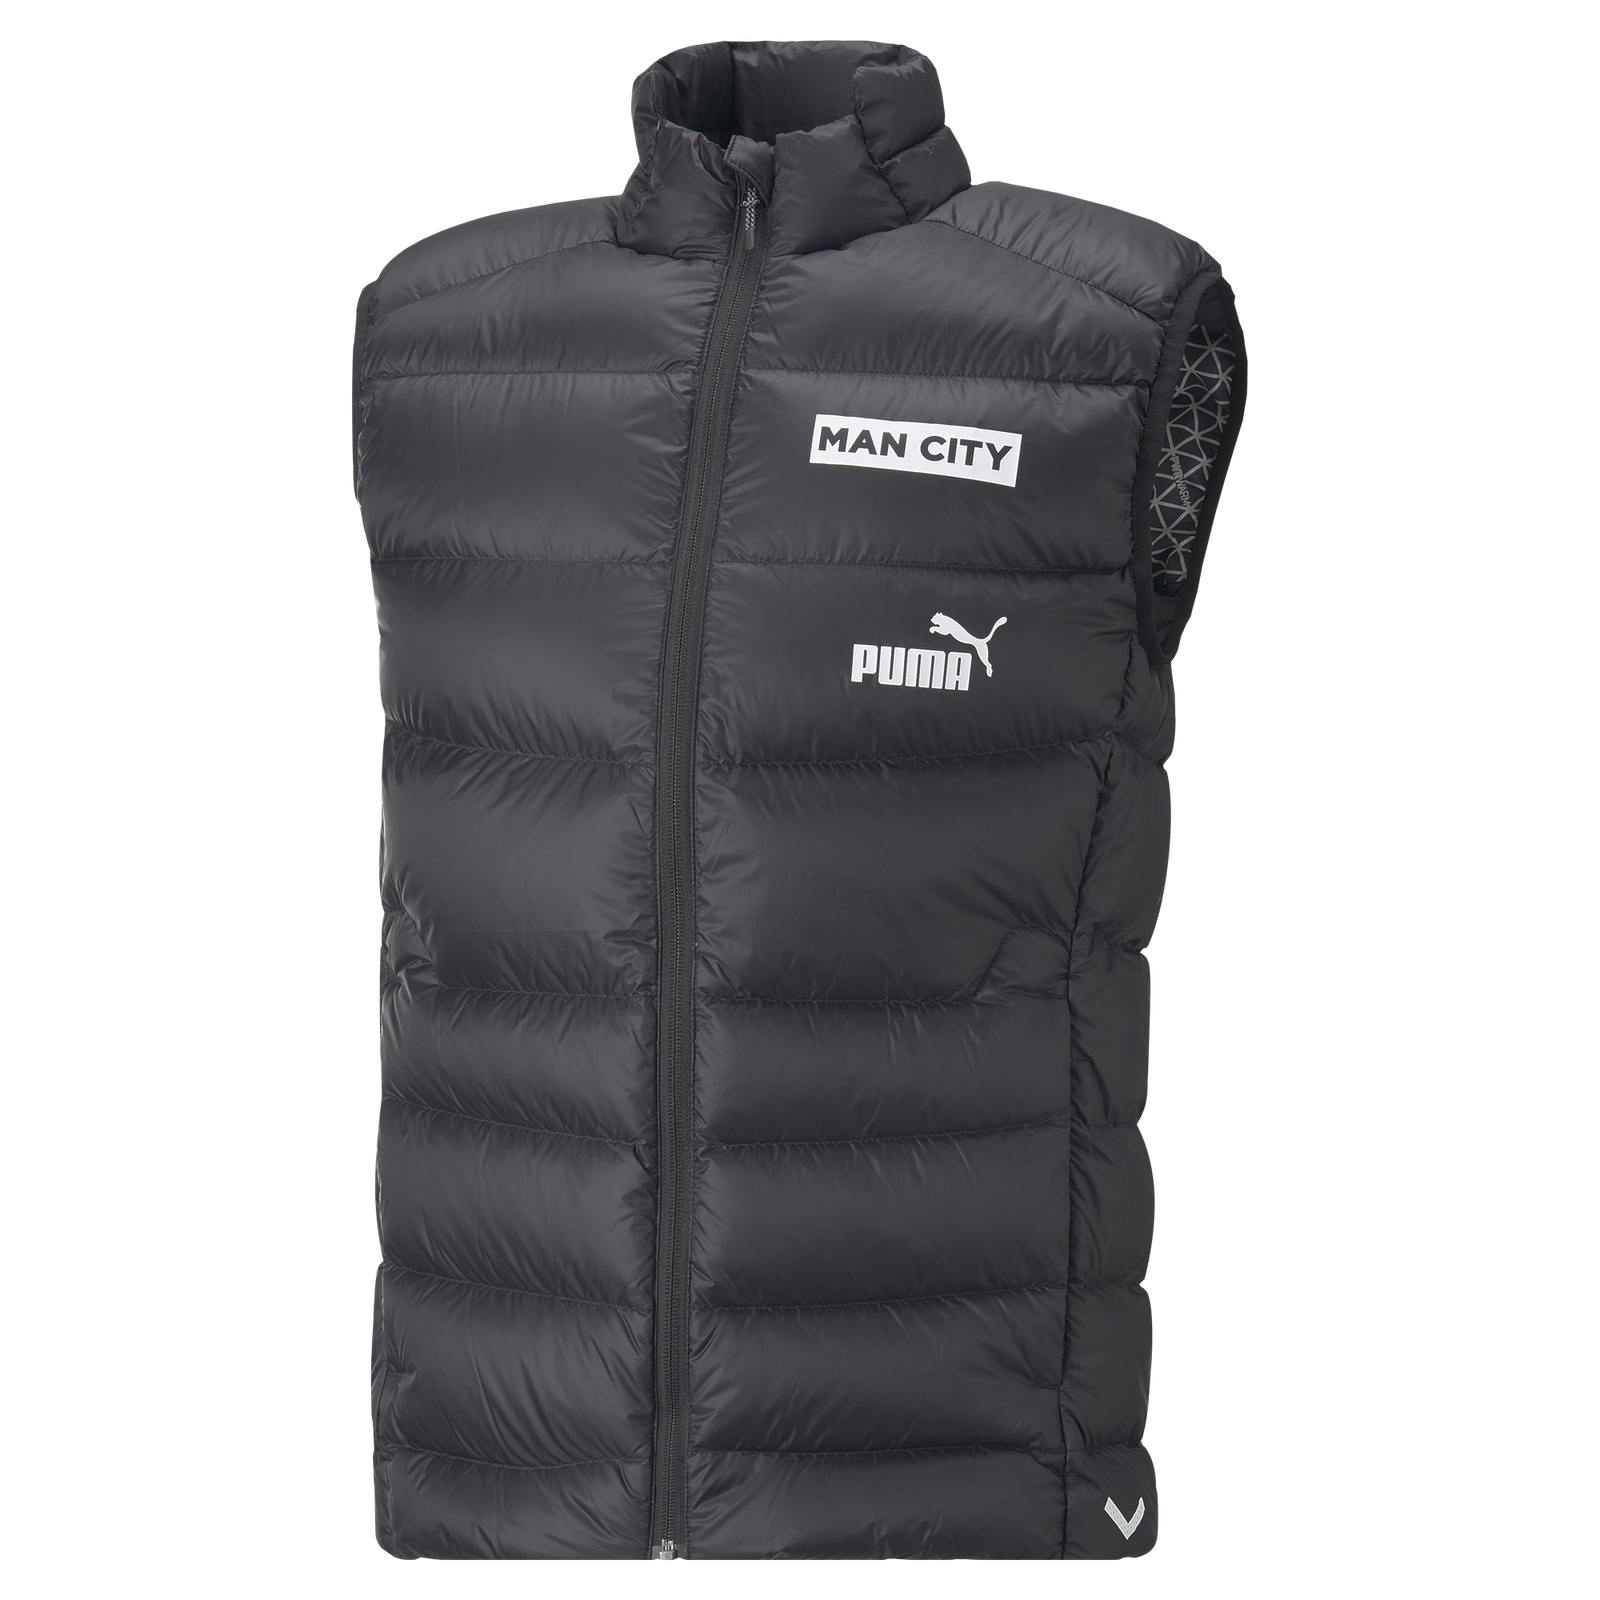 Skim Perceptueel energie Manchester City Casuals Down Gilet | Official Man City Store